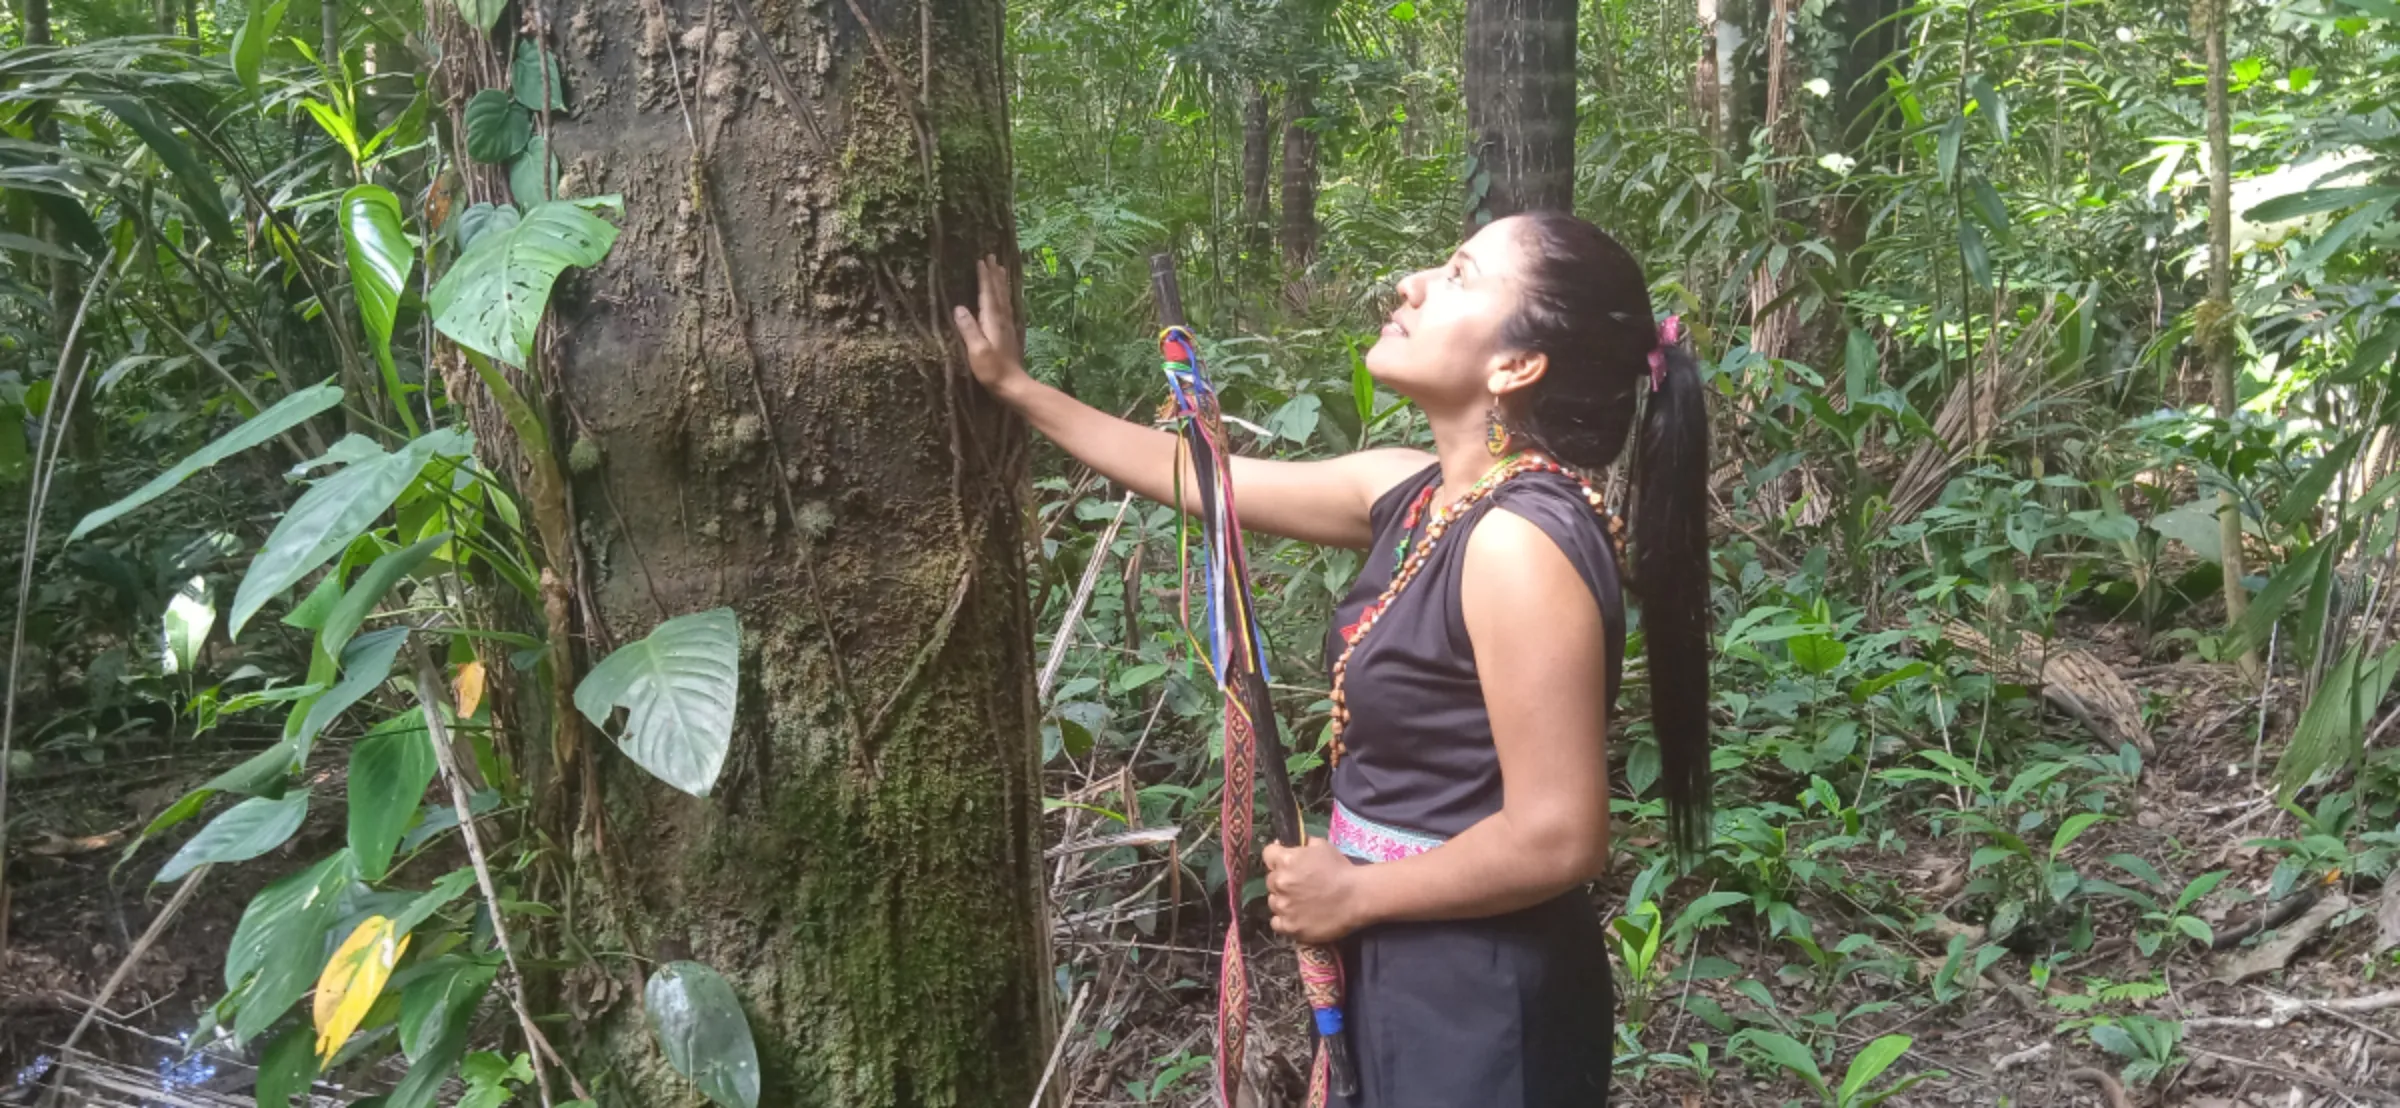 Jasbleidy Olivo, a female governor of the Inga indigenous people stands in their Albania rainforest reserve in the province of Putumayo, Colombia. February 3, 2023